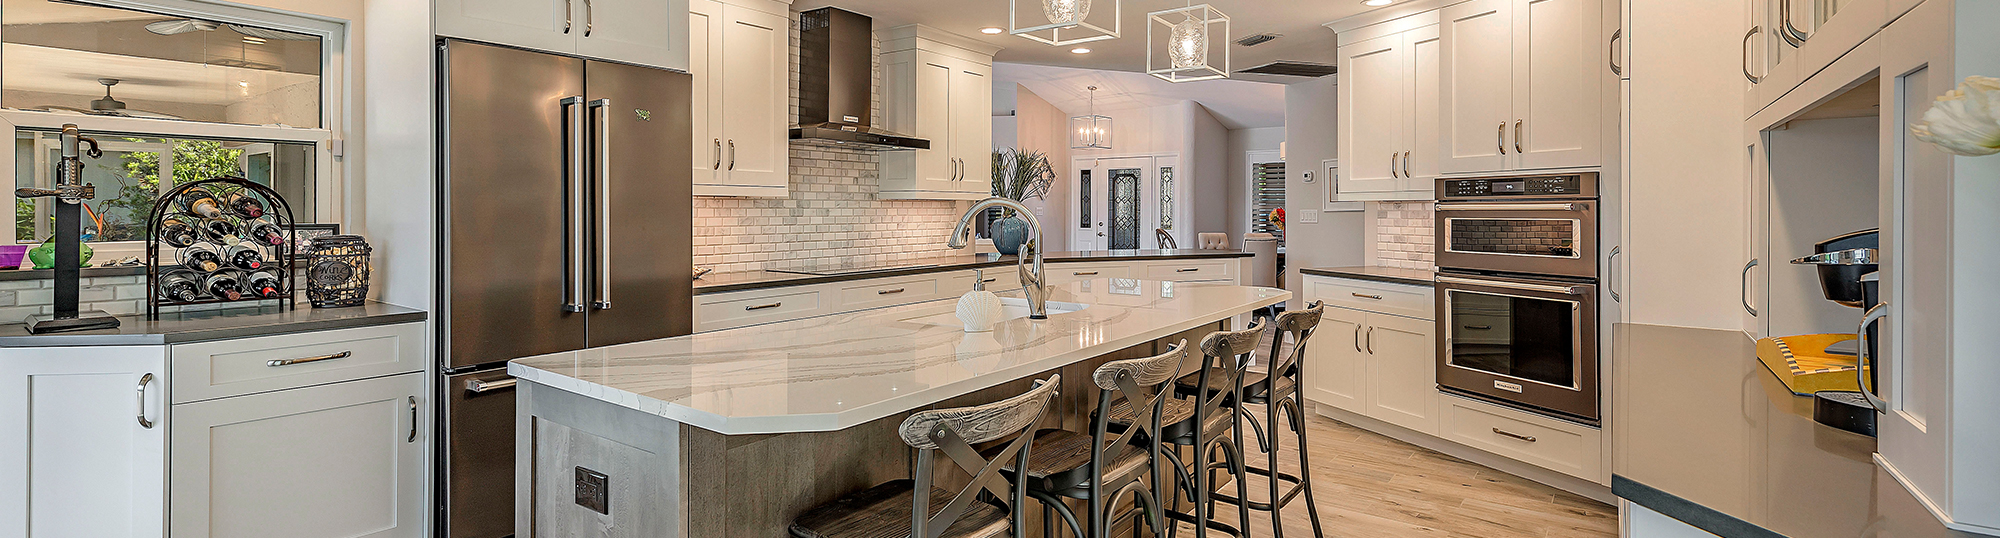 How Much Does A Kitchen Remodel Cost In The Naples Area